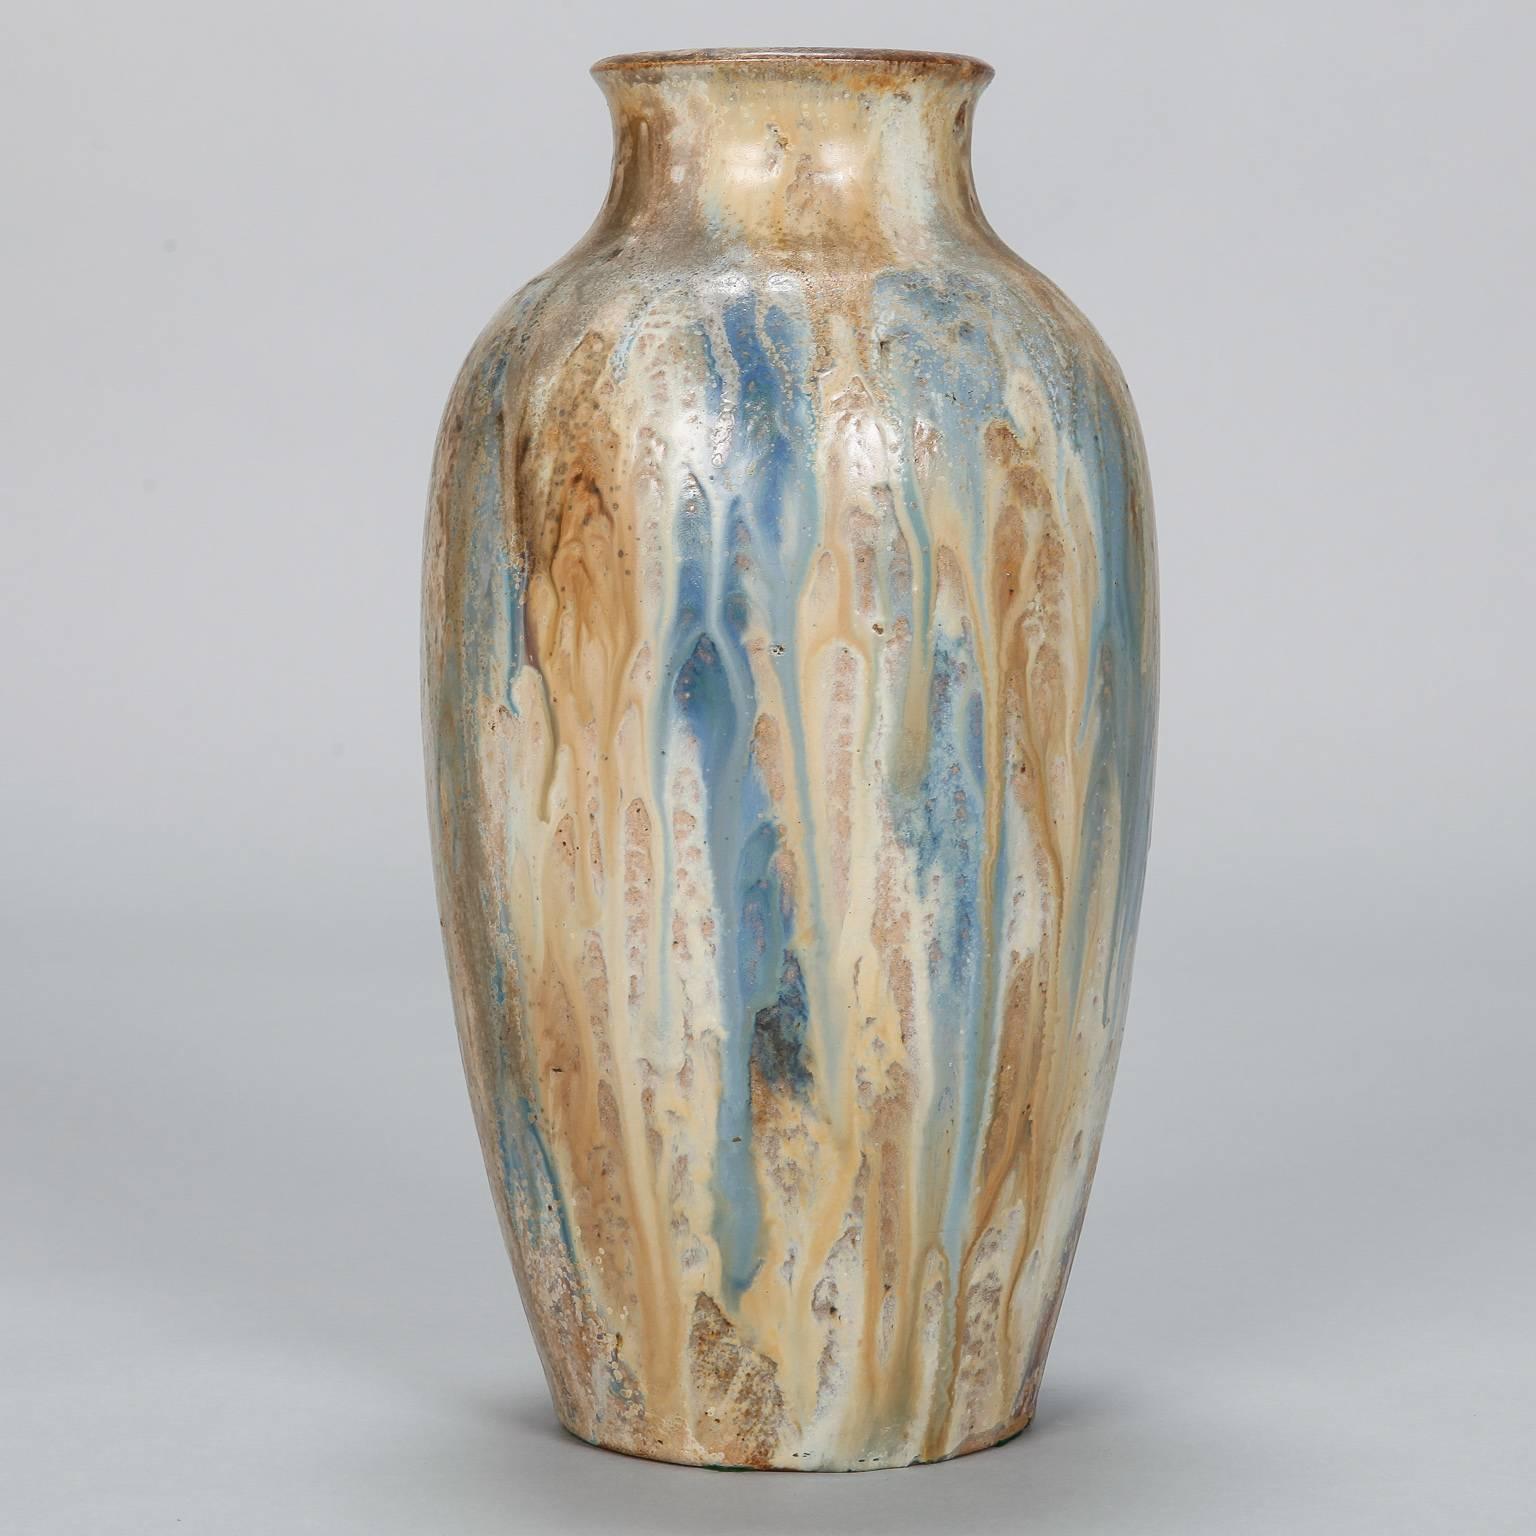 Tall signed vase by Belgian ceramic artist Edgar Aubry in classic form with drip glaze in tones of ochre and blue. Dates from approximately 1930.

 